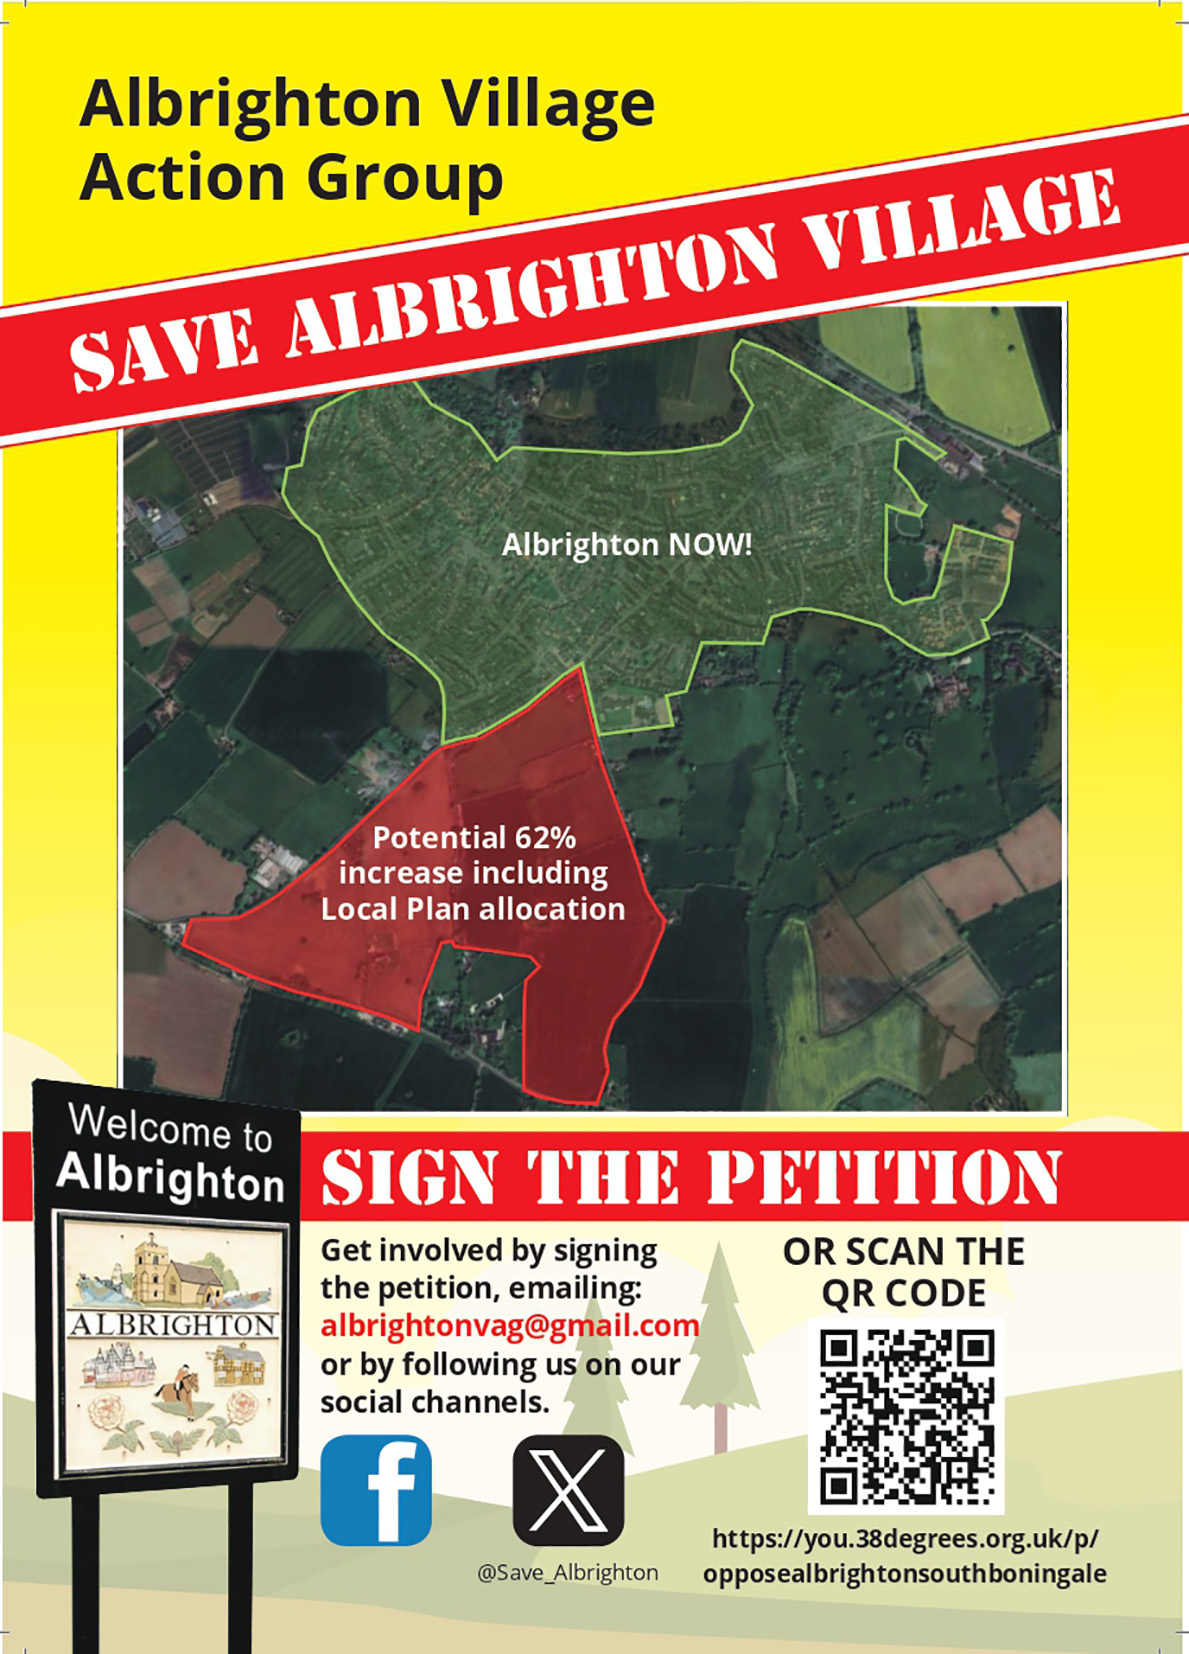 Latest News from Albrighton Village Action Group